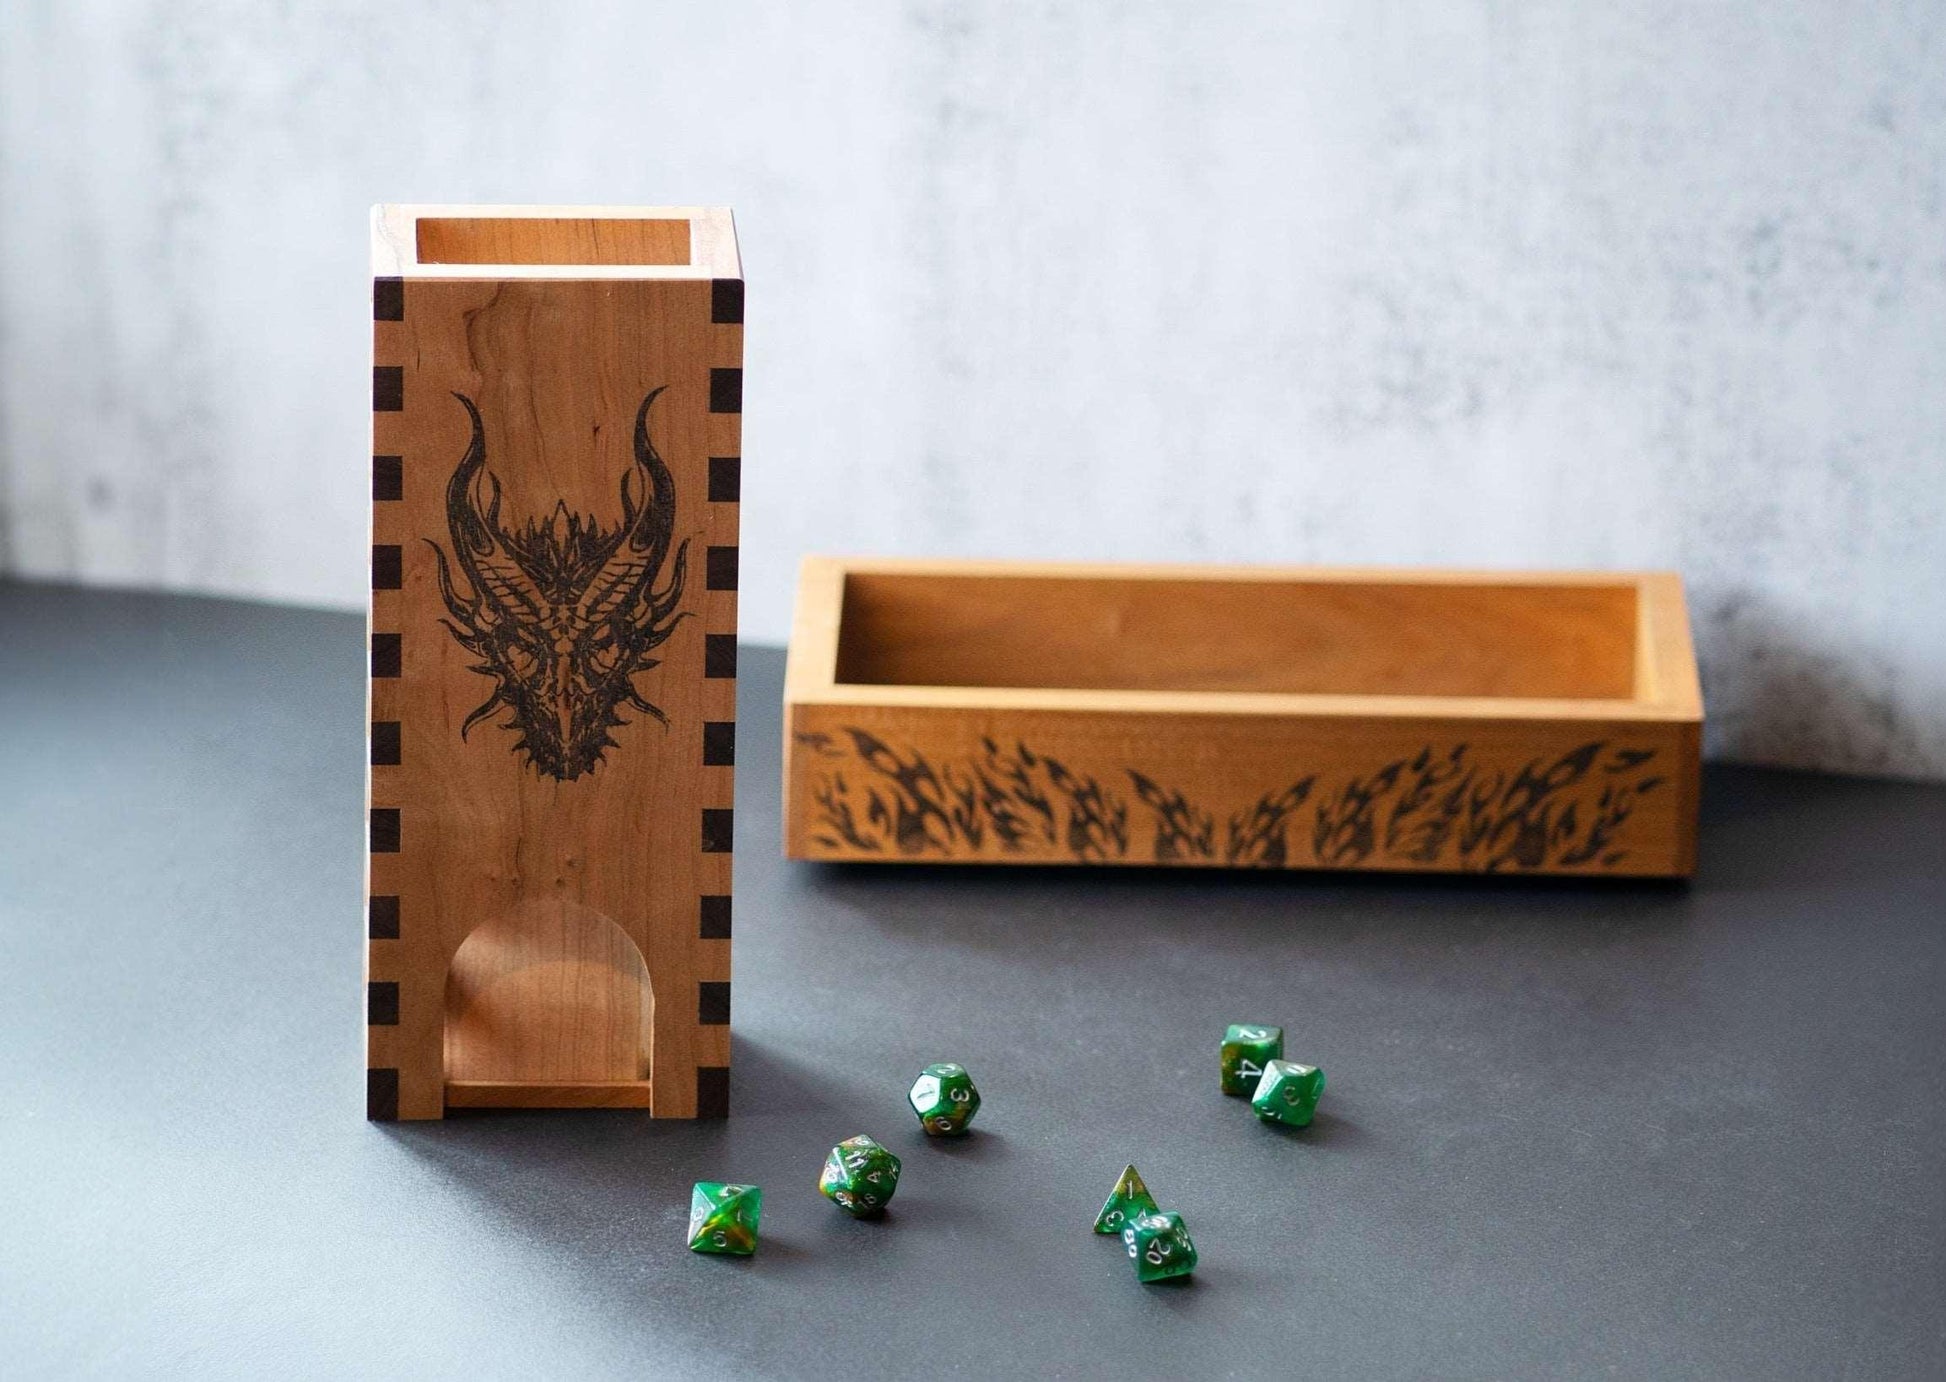 Cherry and Walnut Skeleton Design Dice Tower with Dragon - Dragon Armor Games